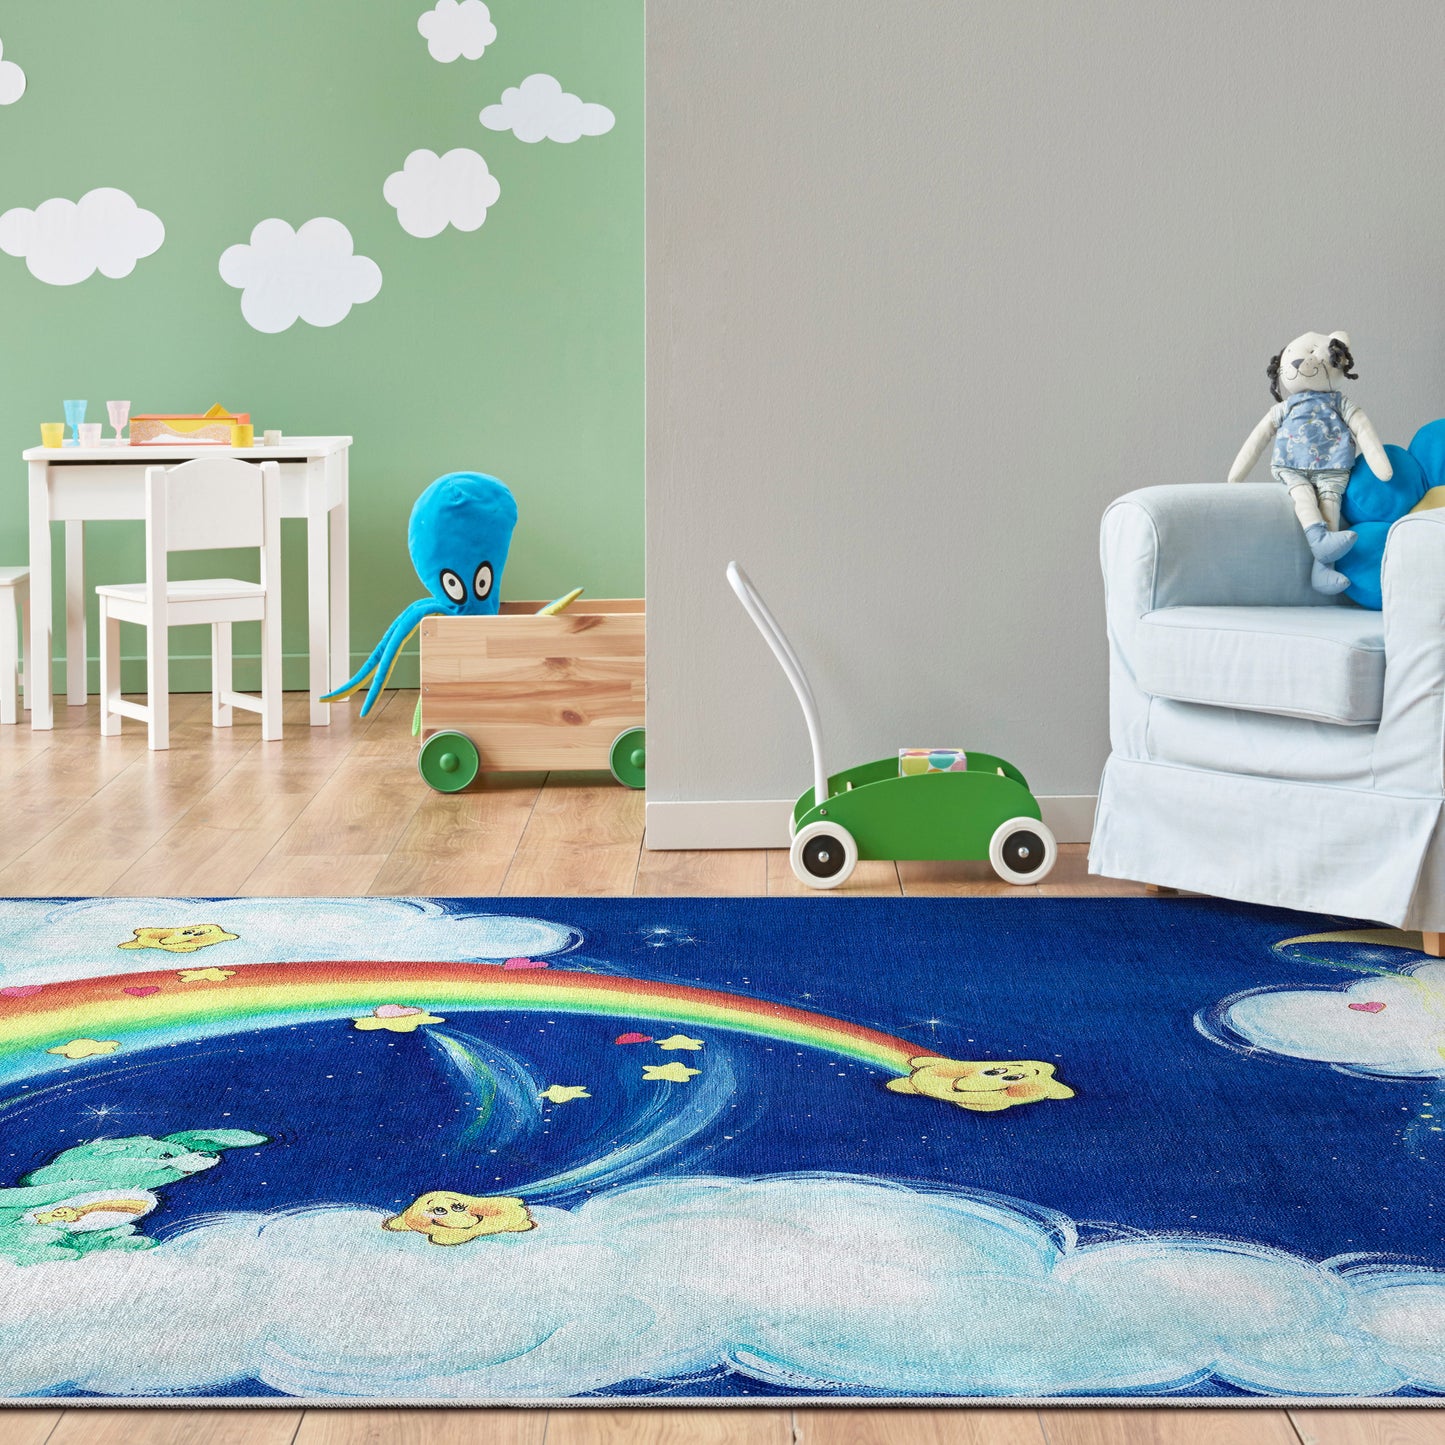 Care Bears Wish Bear and the Moon Blue Rug CRB-06A